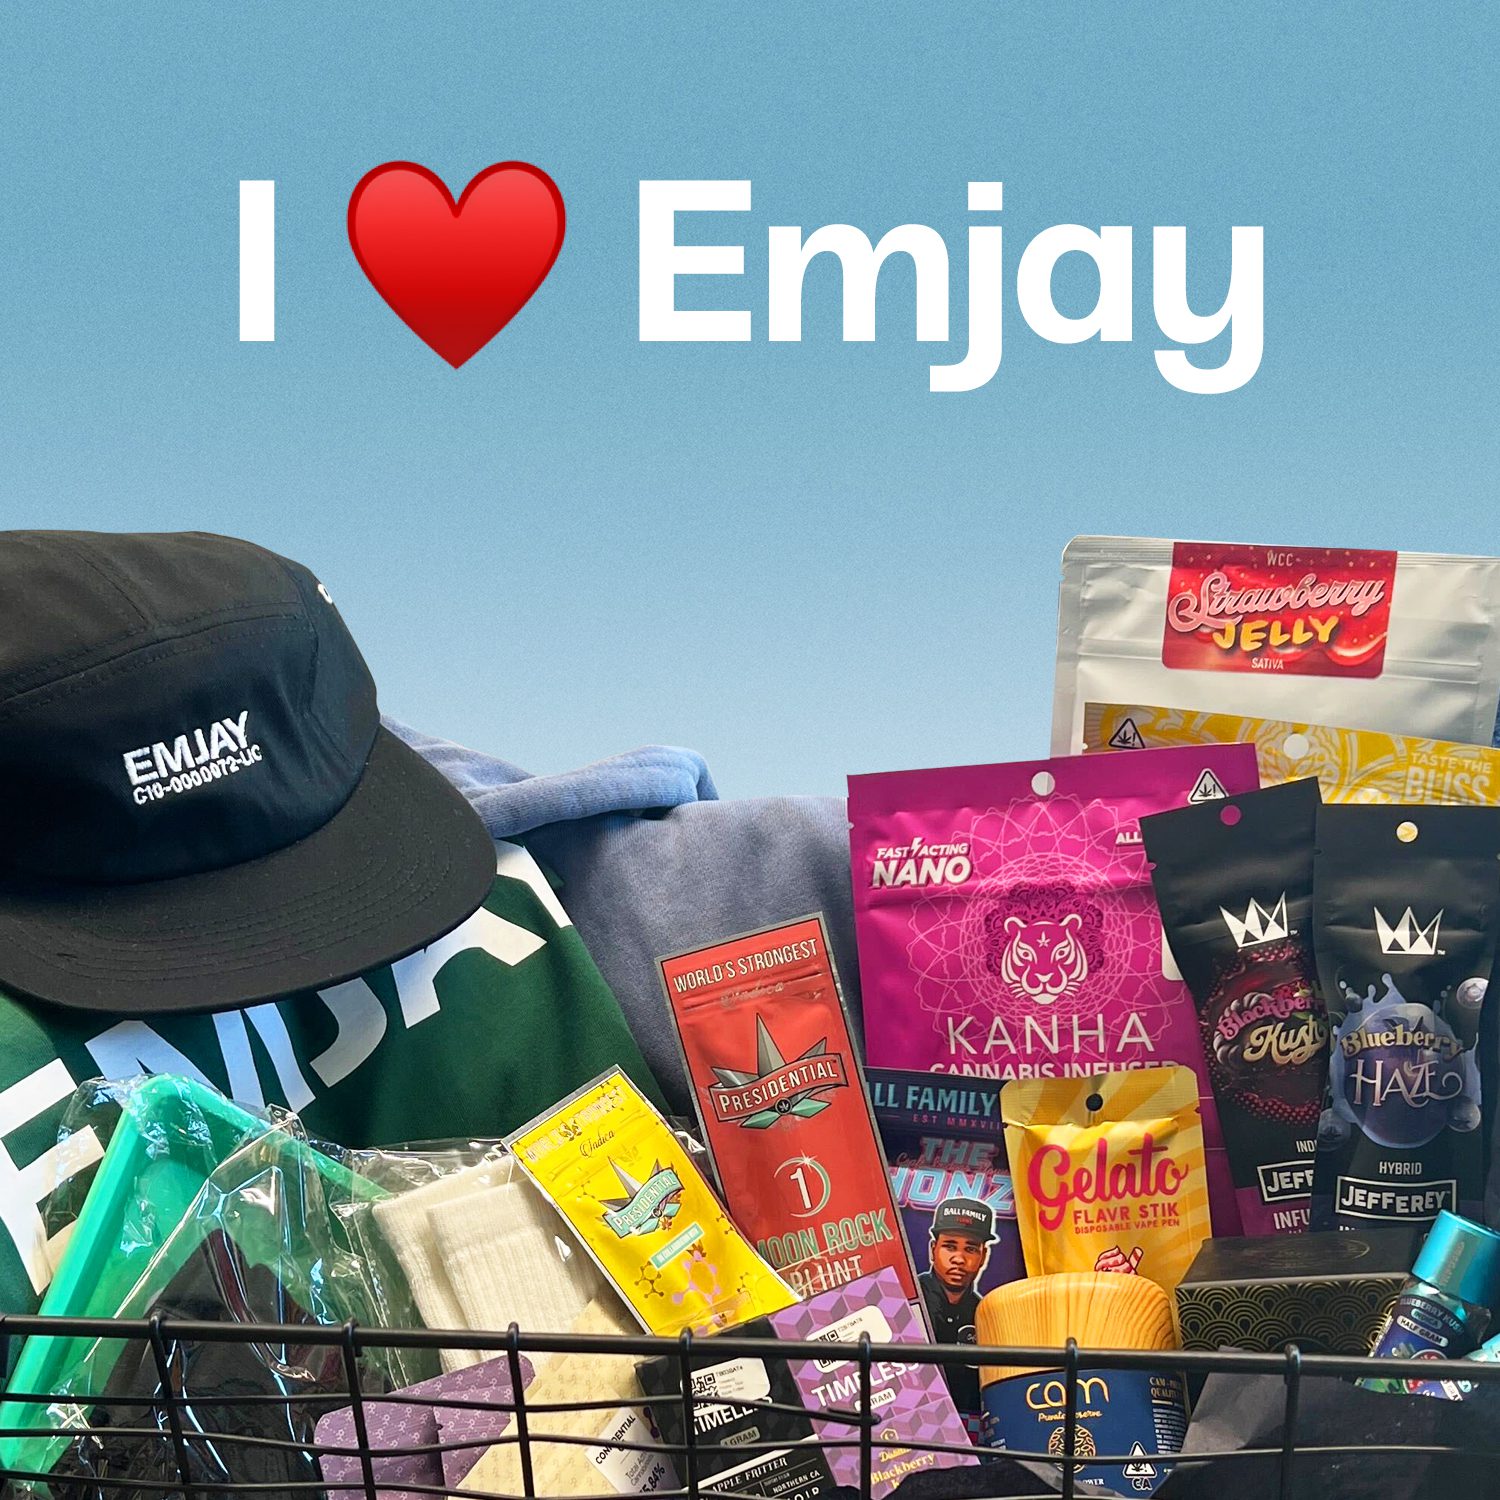 The I Love Emjay Giveaway in San Diego